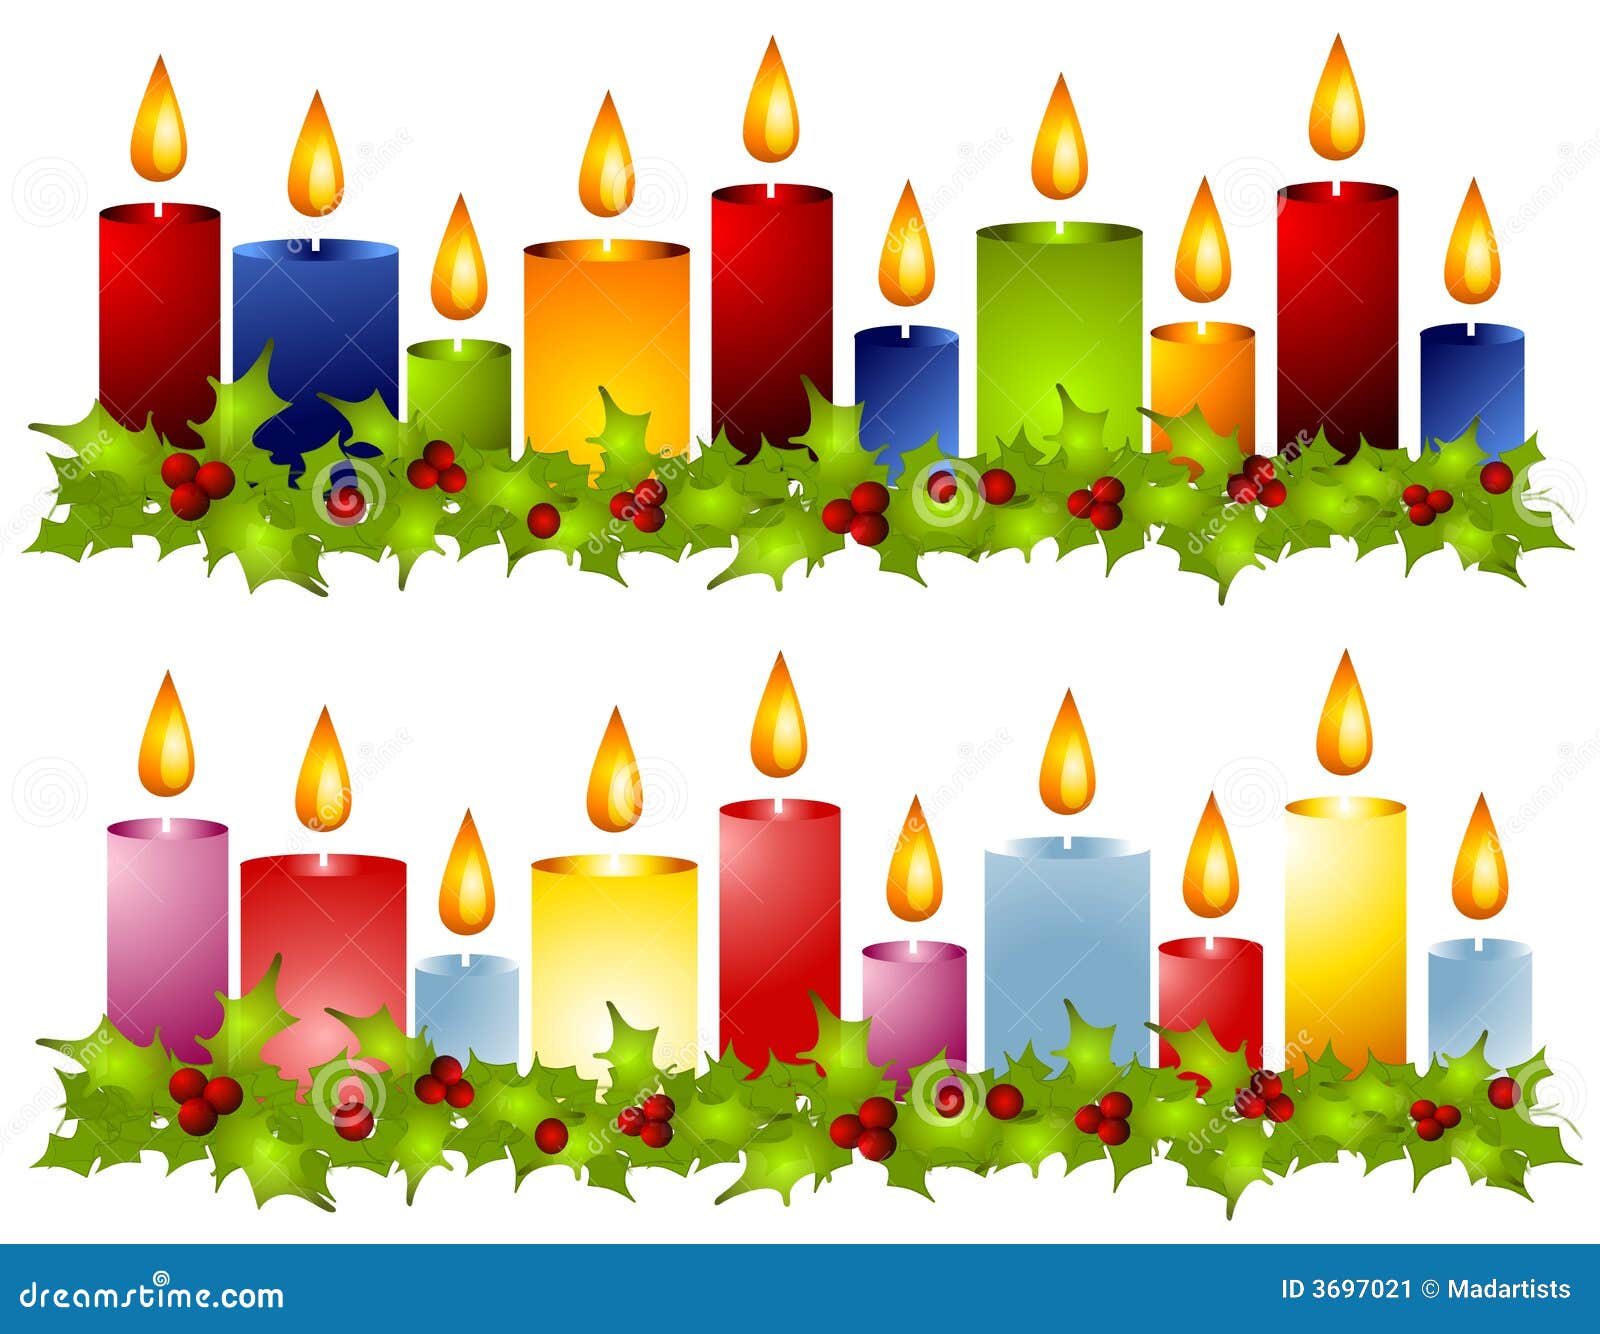 Christmas Candle Holly Wreath Borders A clip art illustration of your choice of 2 Christmas